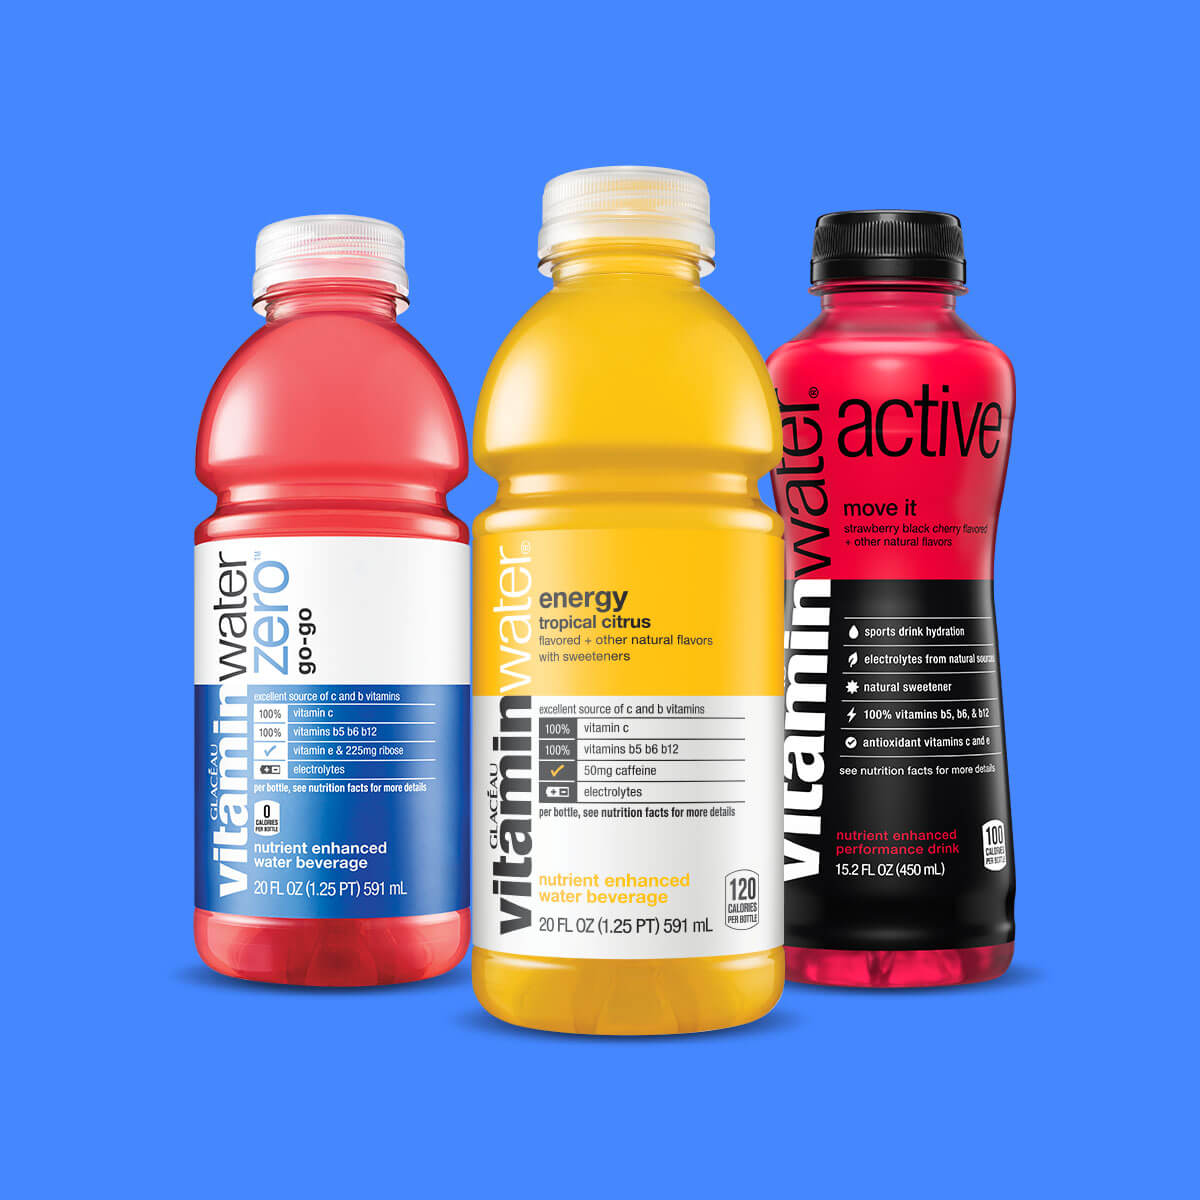 Stay hydrated with electrolyte enhanced water